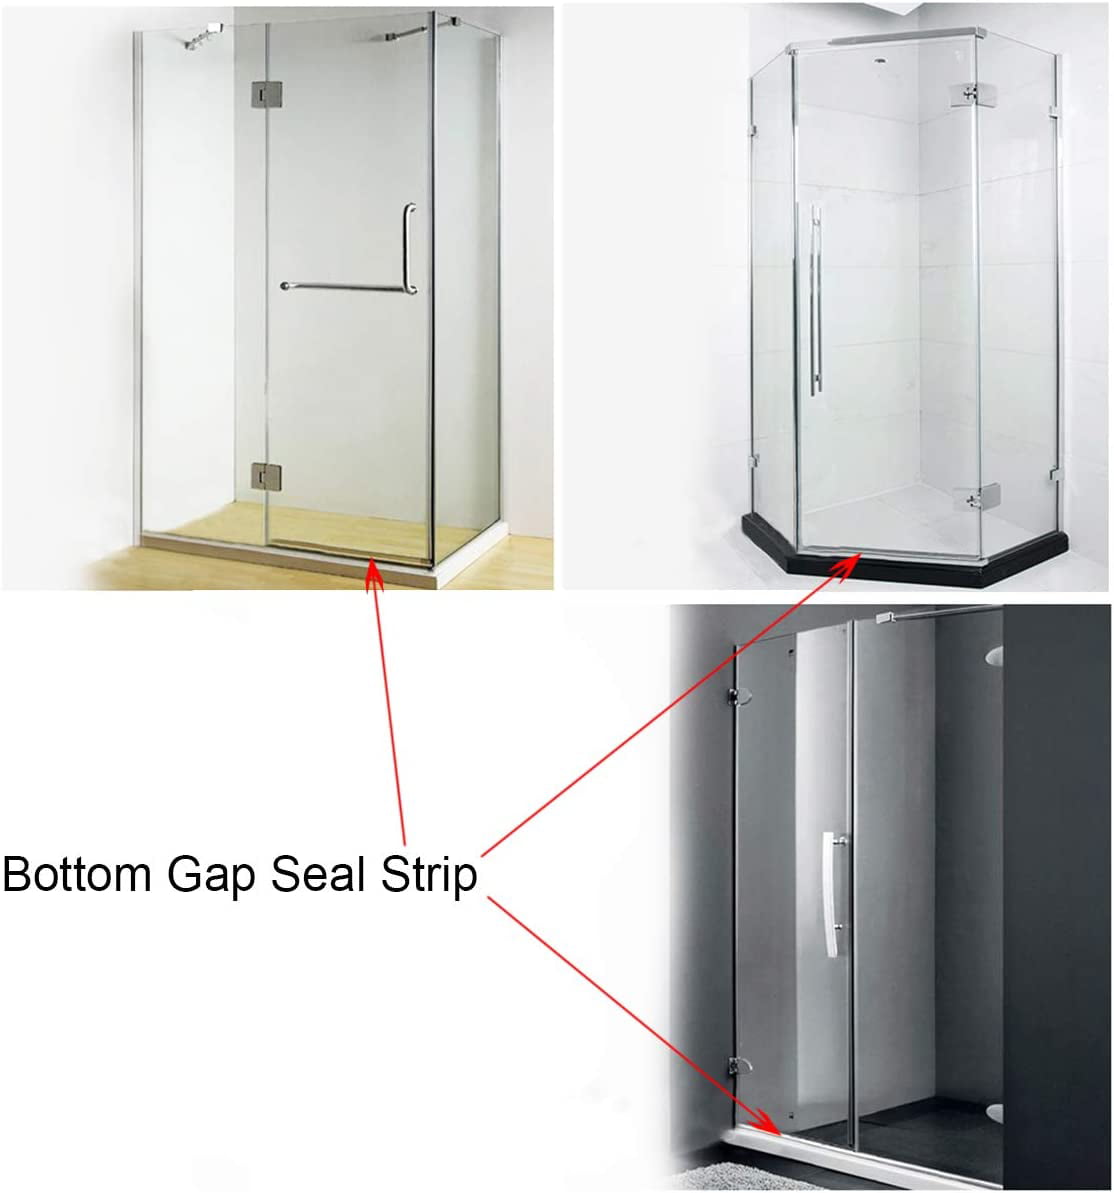 Casewin Shower Screen Seal Strip, 3Pcs Plastic Shower Door Seal for 10mm  Straight Glass Screens, 40cm/15.75in Bath Shower Screen Bottom Seal 